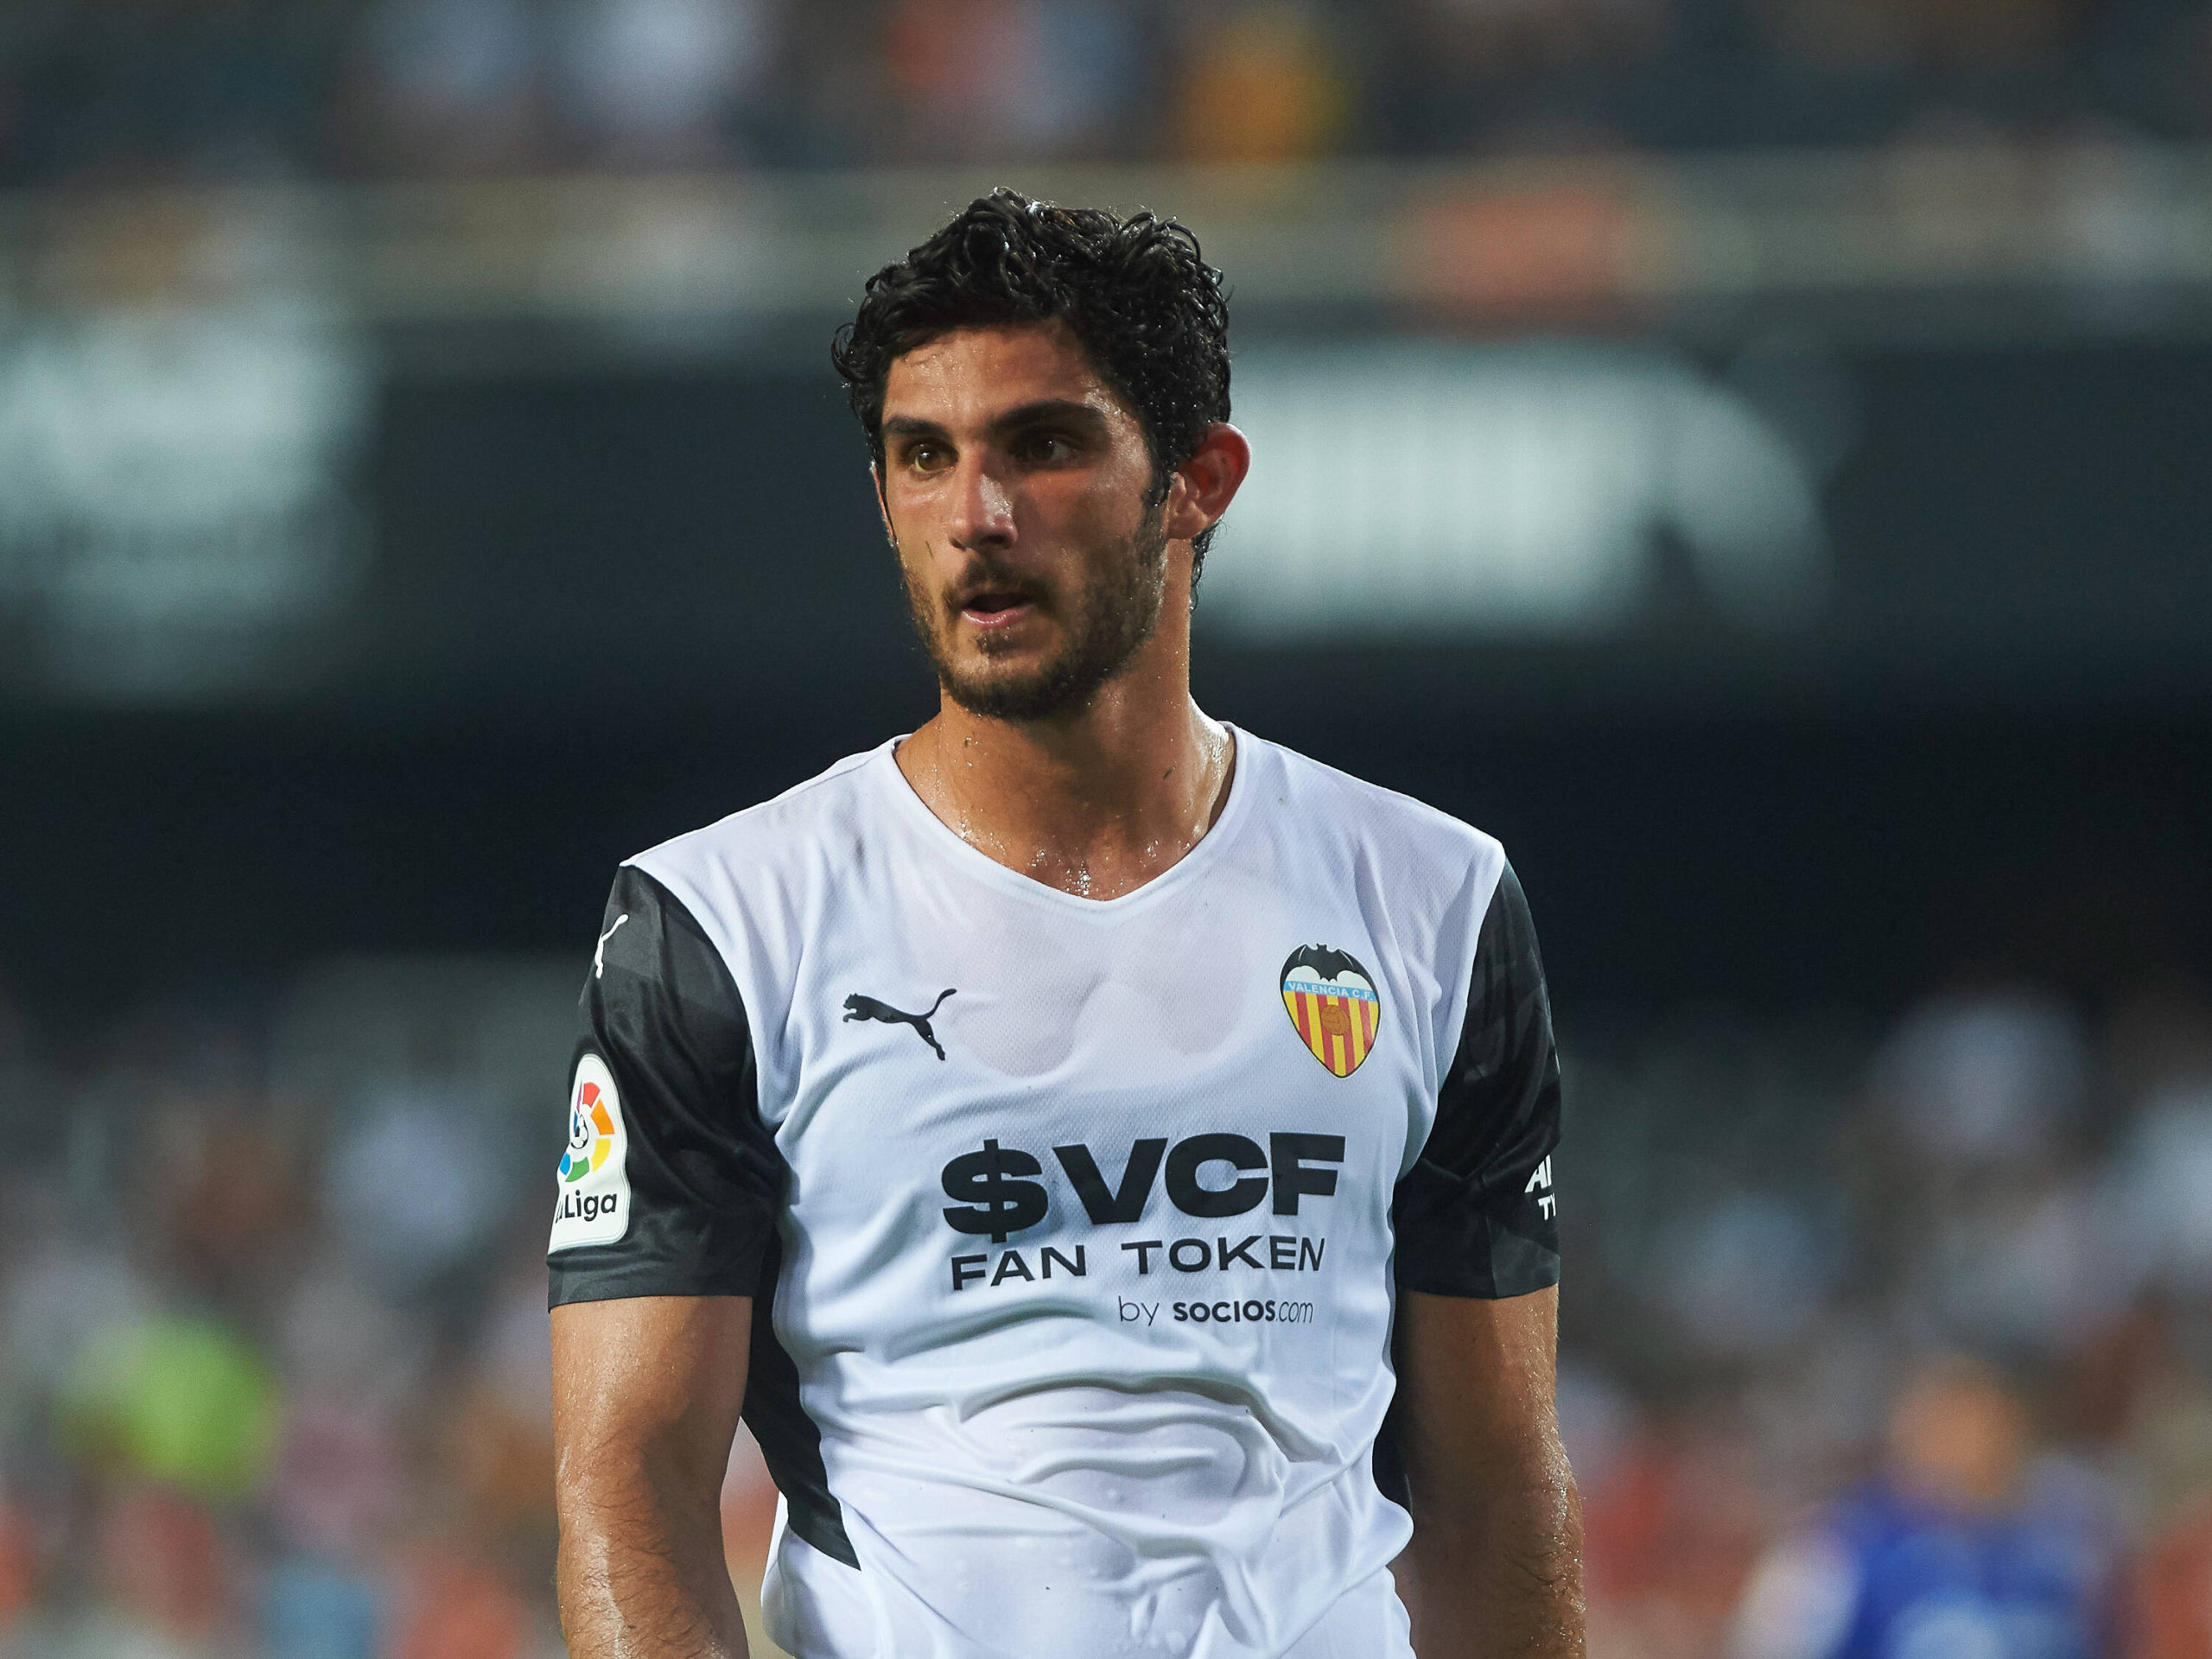 Although Roma were very active within the transfer market, Mourinho is plotting an attempt to bring Gonçalo Guedes to the Stadio Olimpico next season.